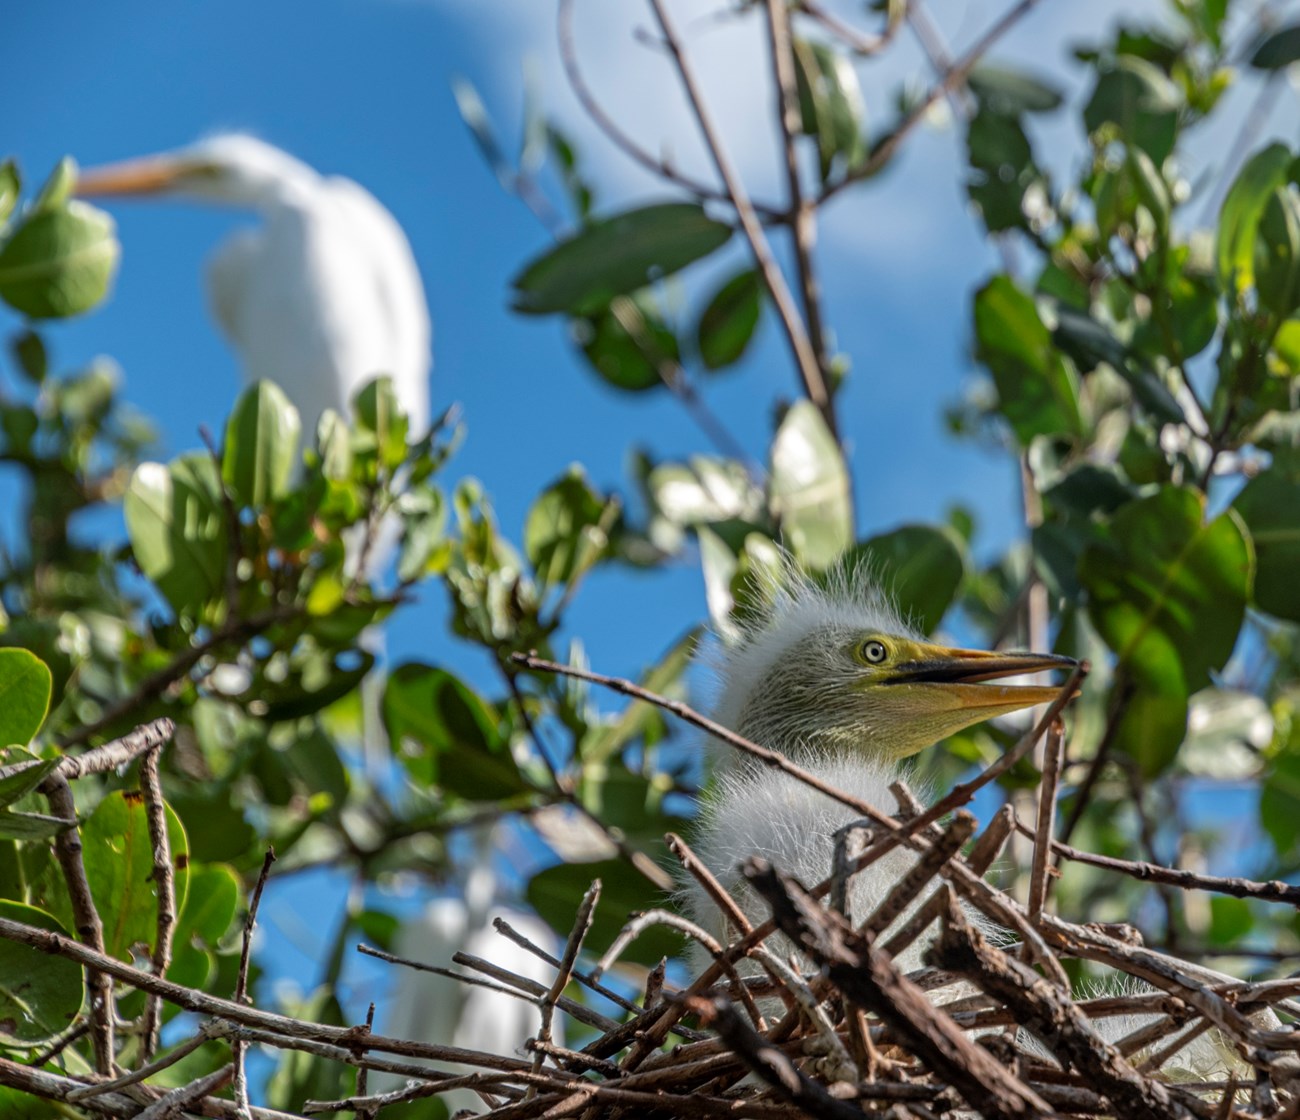 A young, white bird sits in a nest made of sticks while an older white bird perches in the branches above. Green leaves cover the space between the two birds.